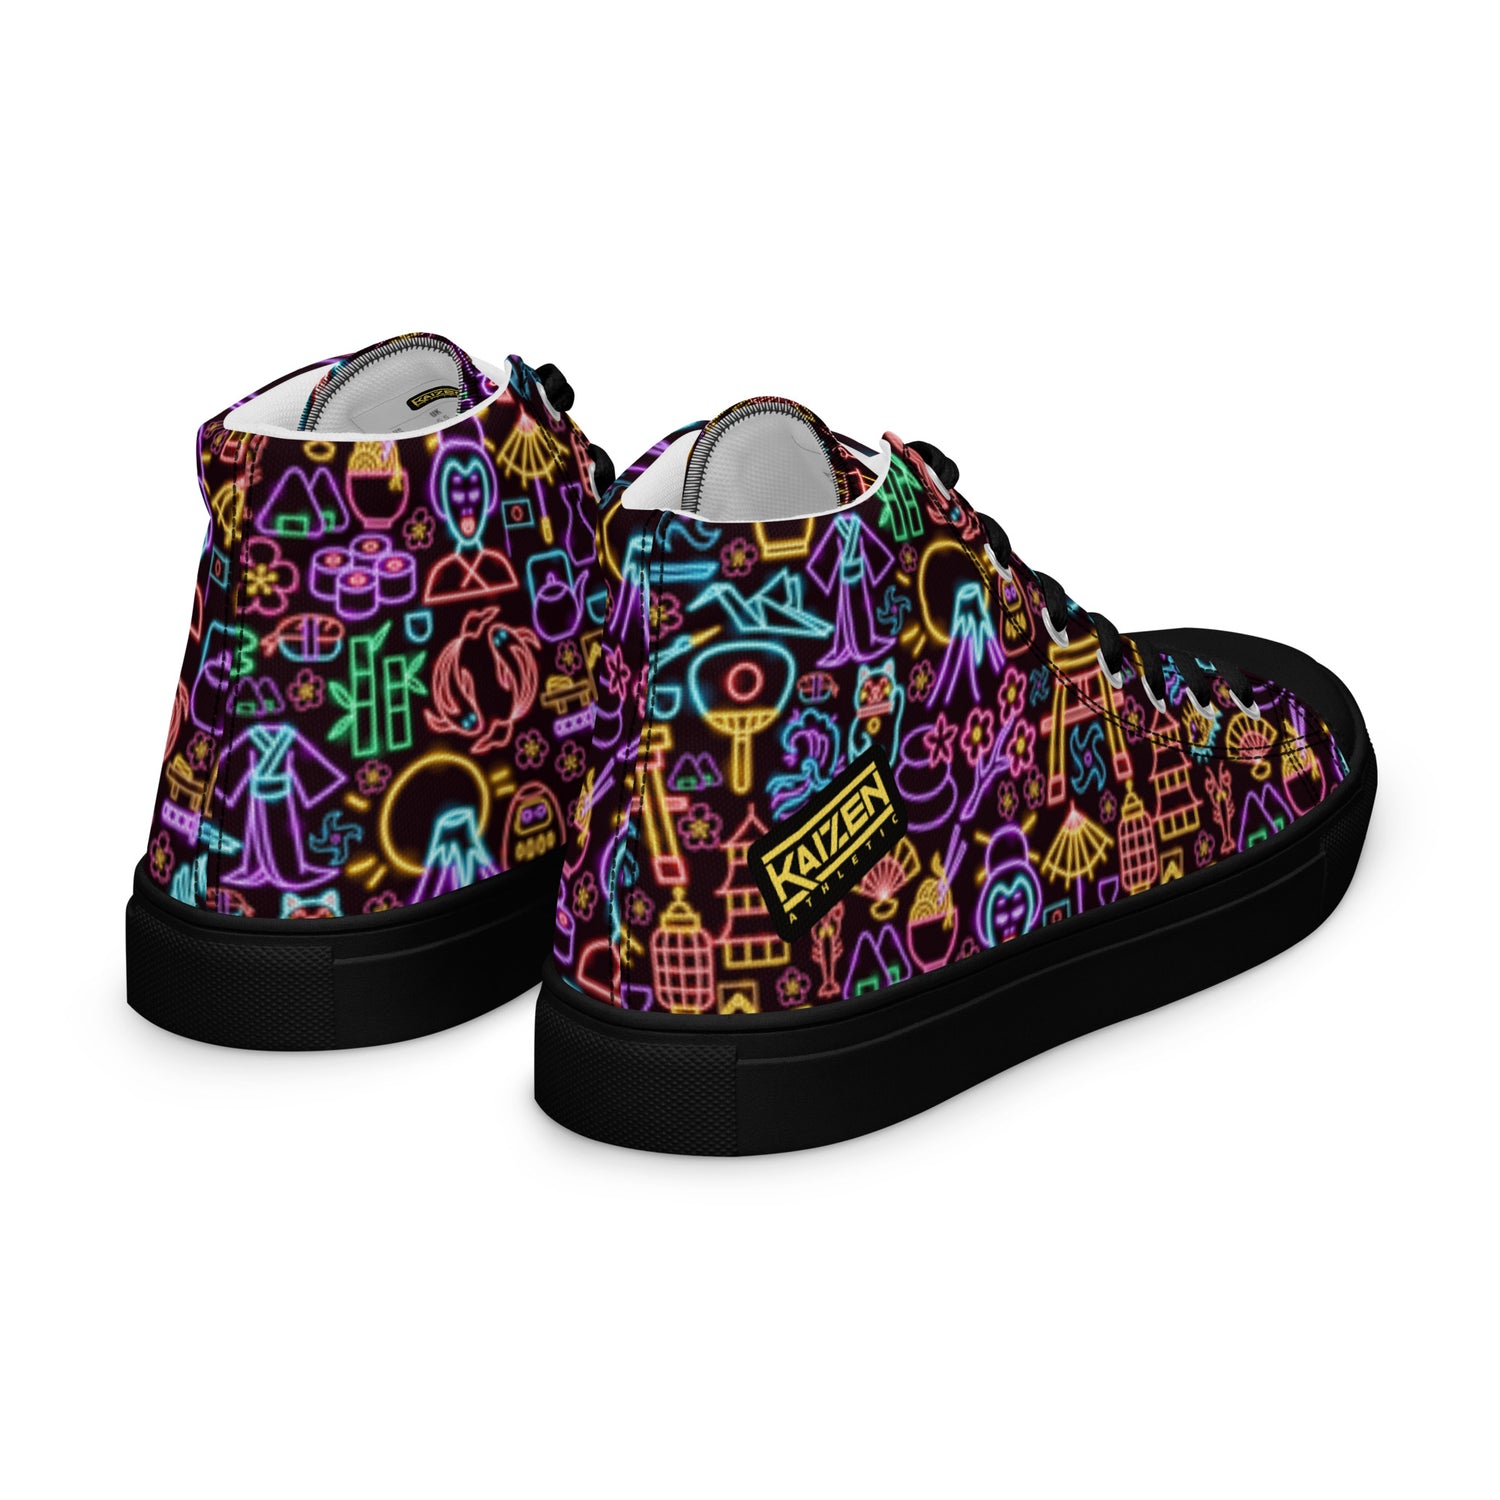 Neon Nights Men’s High top Canvas Shoes by Kaizen Athletic